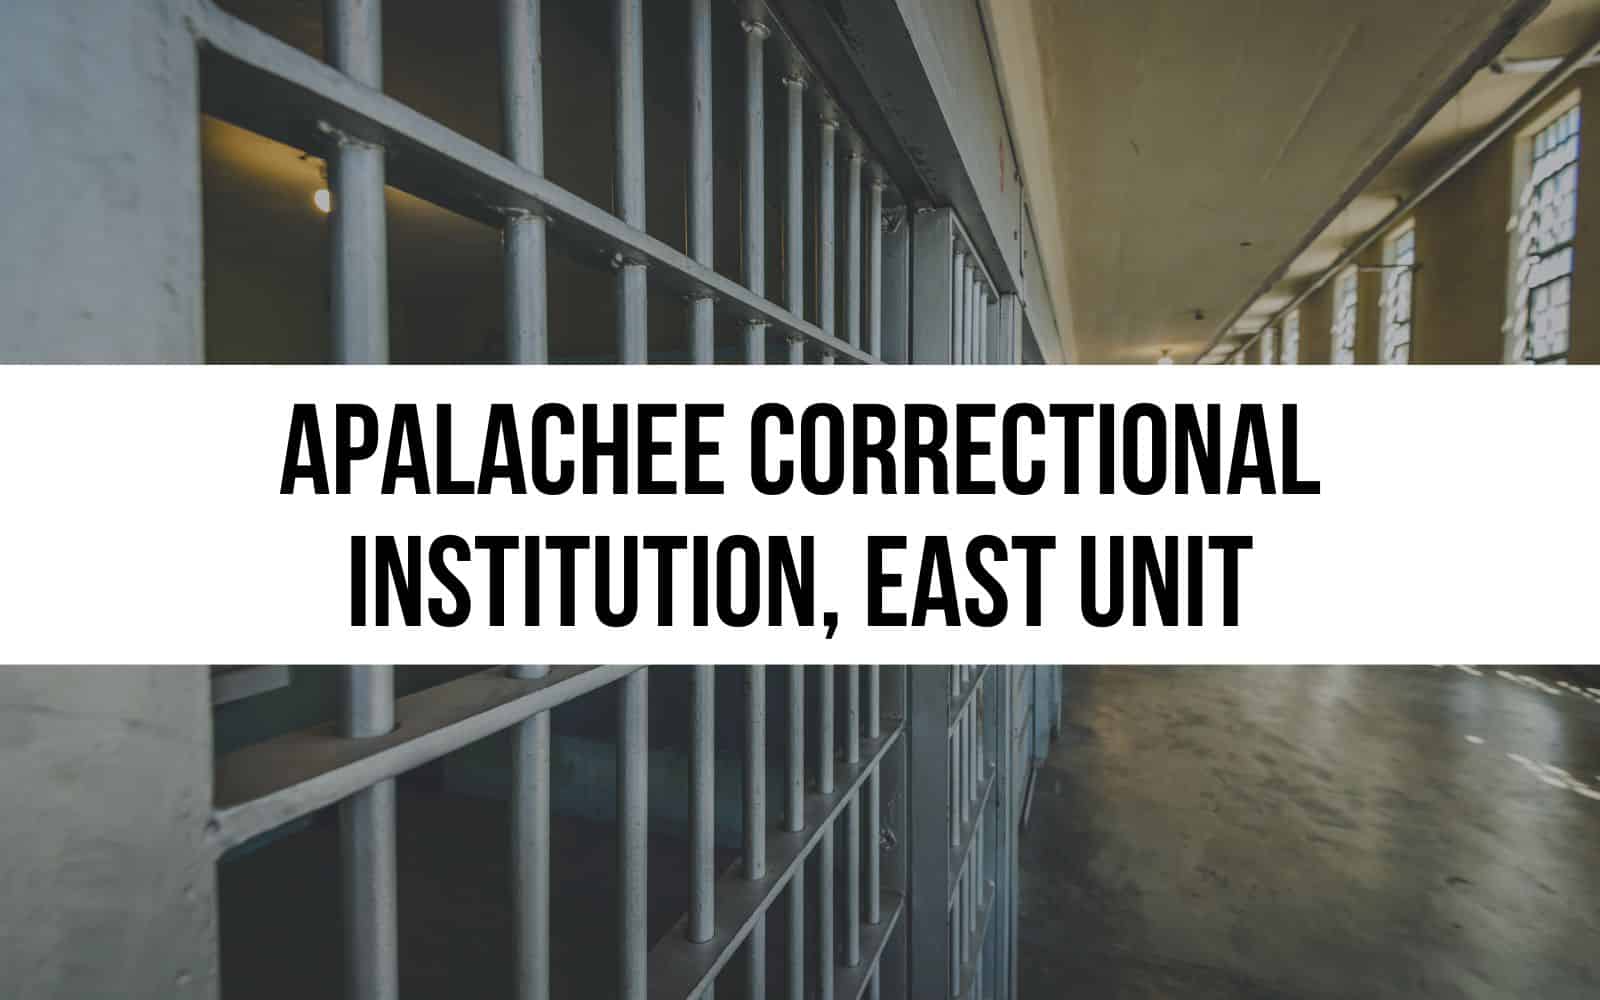 Apalachee Correctional Institution, East Unit